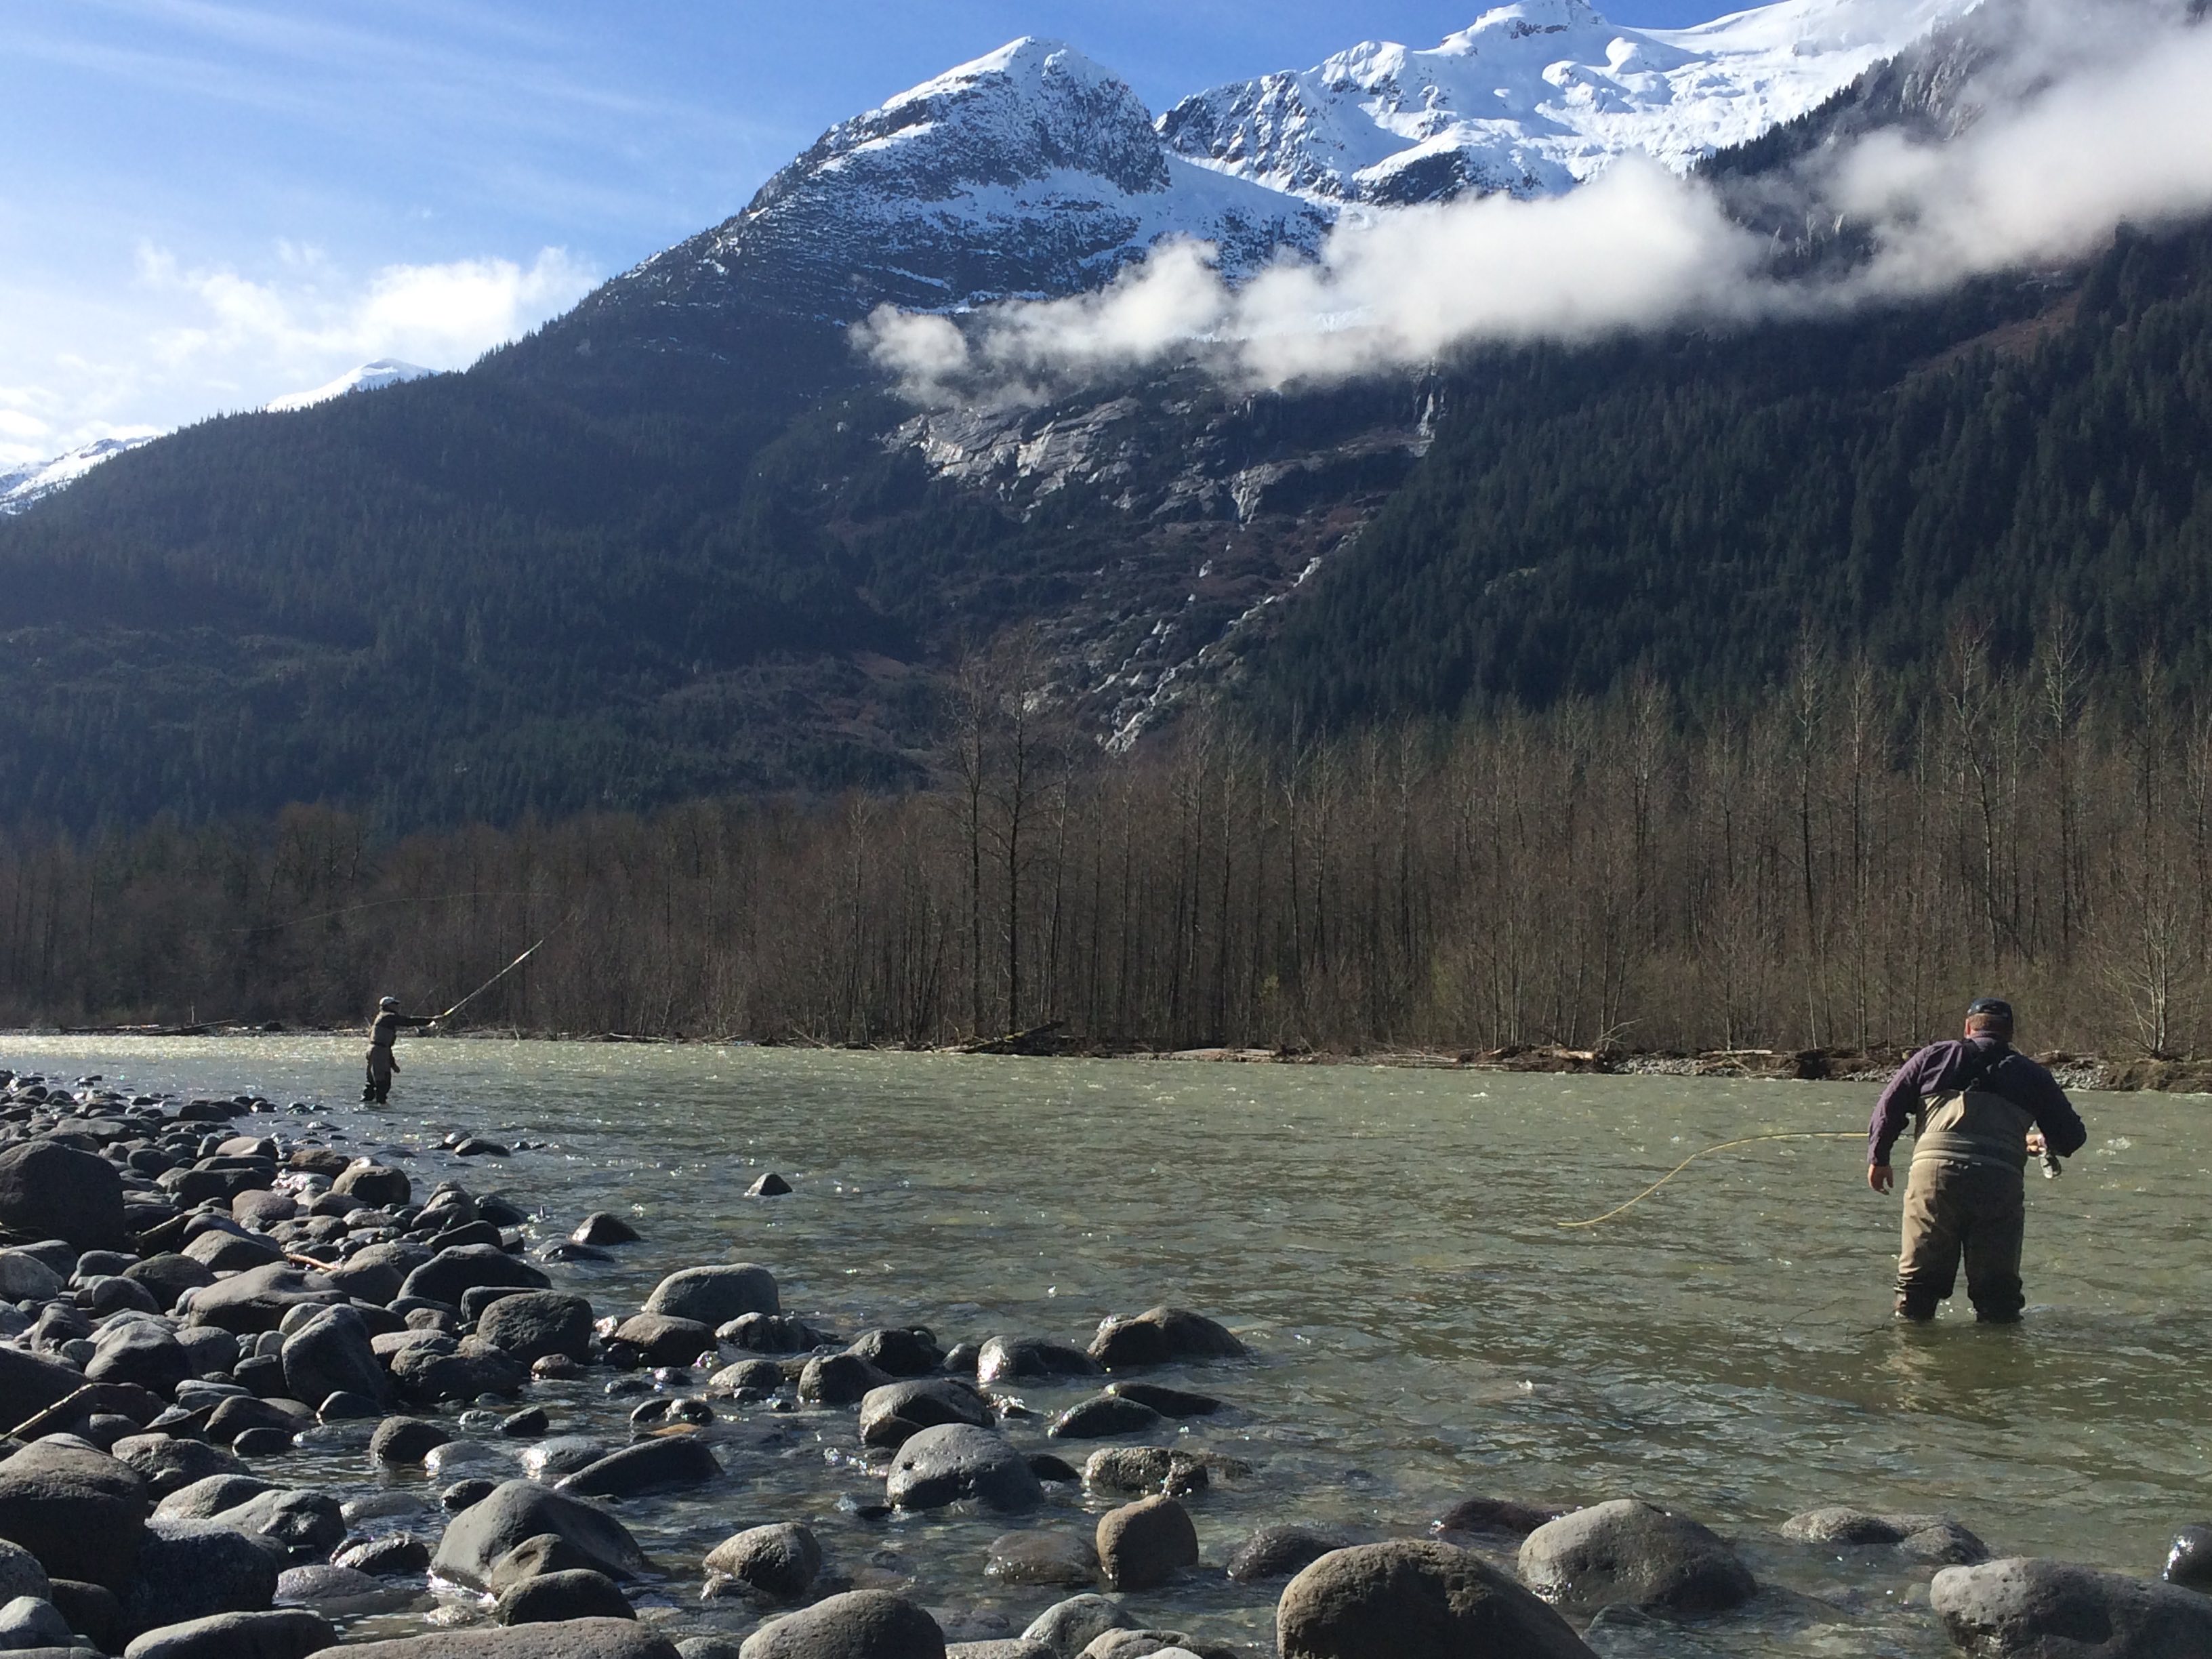 Beauty day for chasing fish on the Squamish.